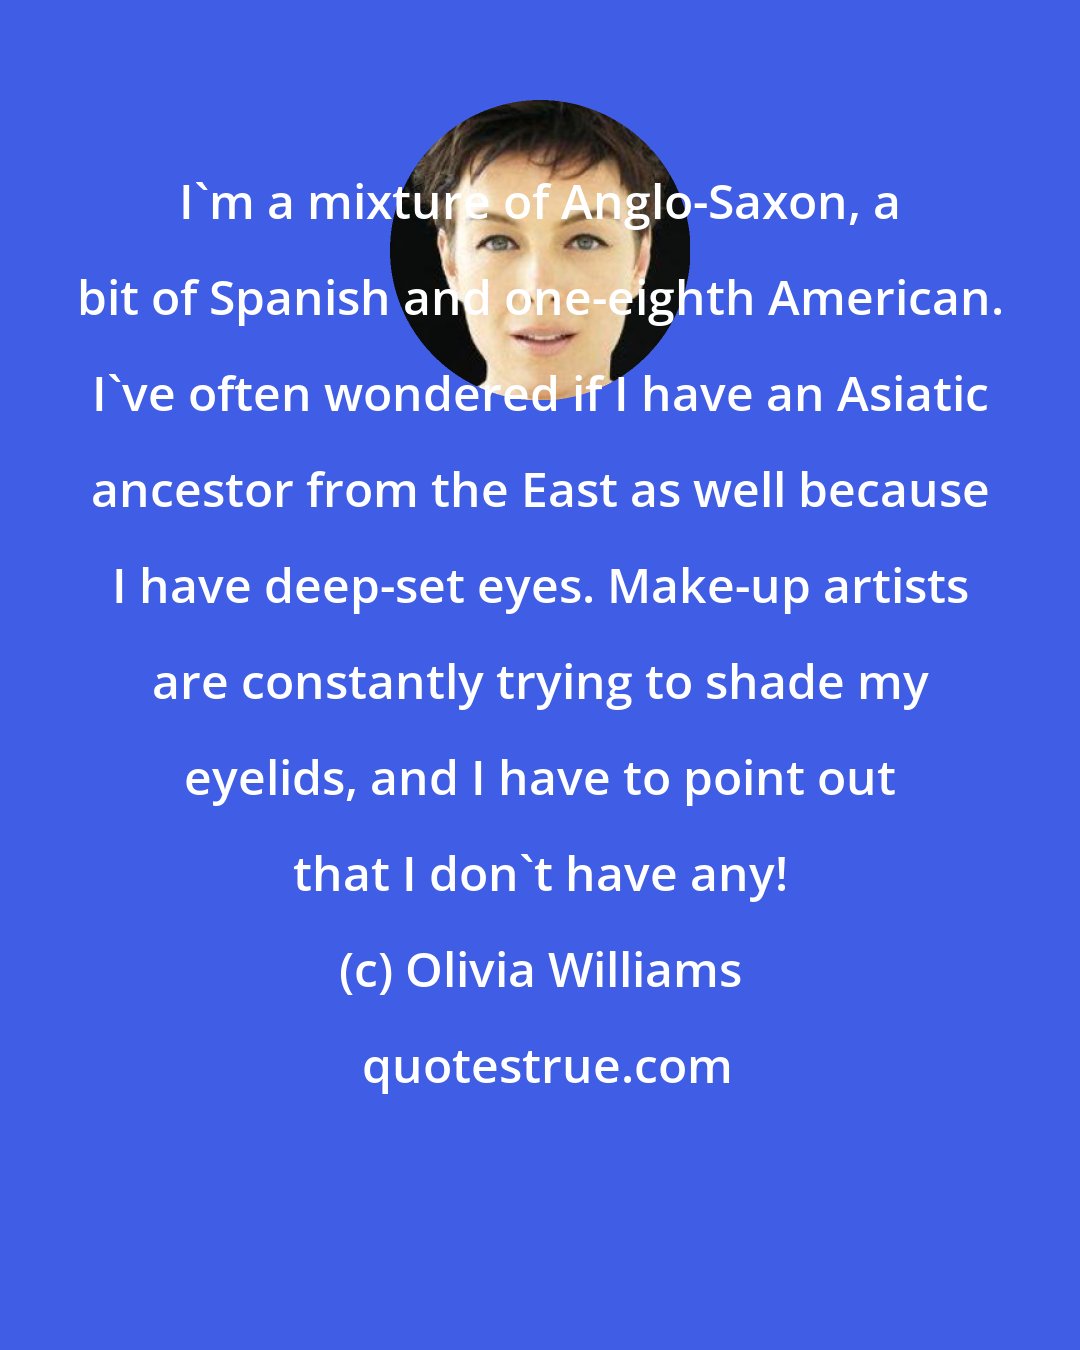 Olivia Williams: I'm a mixture of Anglo-Saxon, a bit of Spanish and one-eighth American. I've often wondered if I have an Asiatic ancestor from the East as well because I have deep-set eyes. Make-up artists are constantly trying to shade my eyelids, and I have to point out that I don't have any!